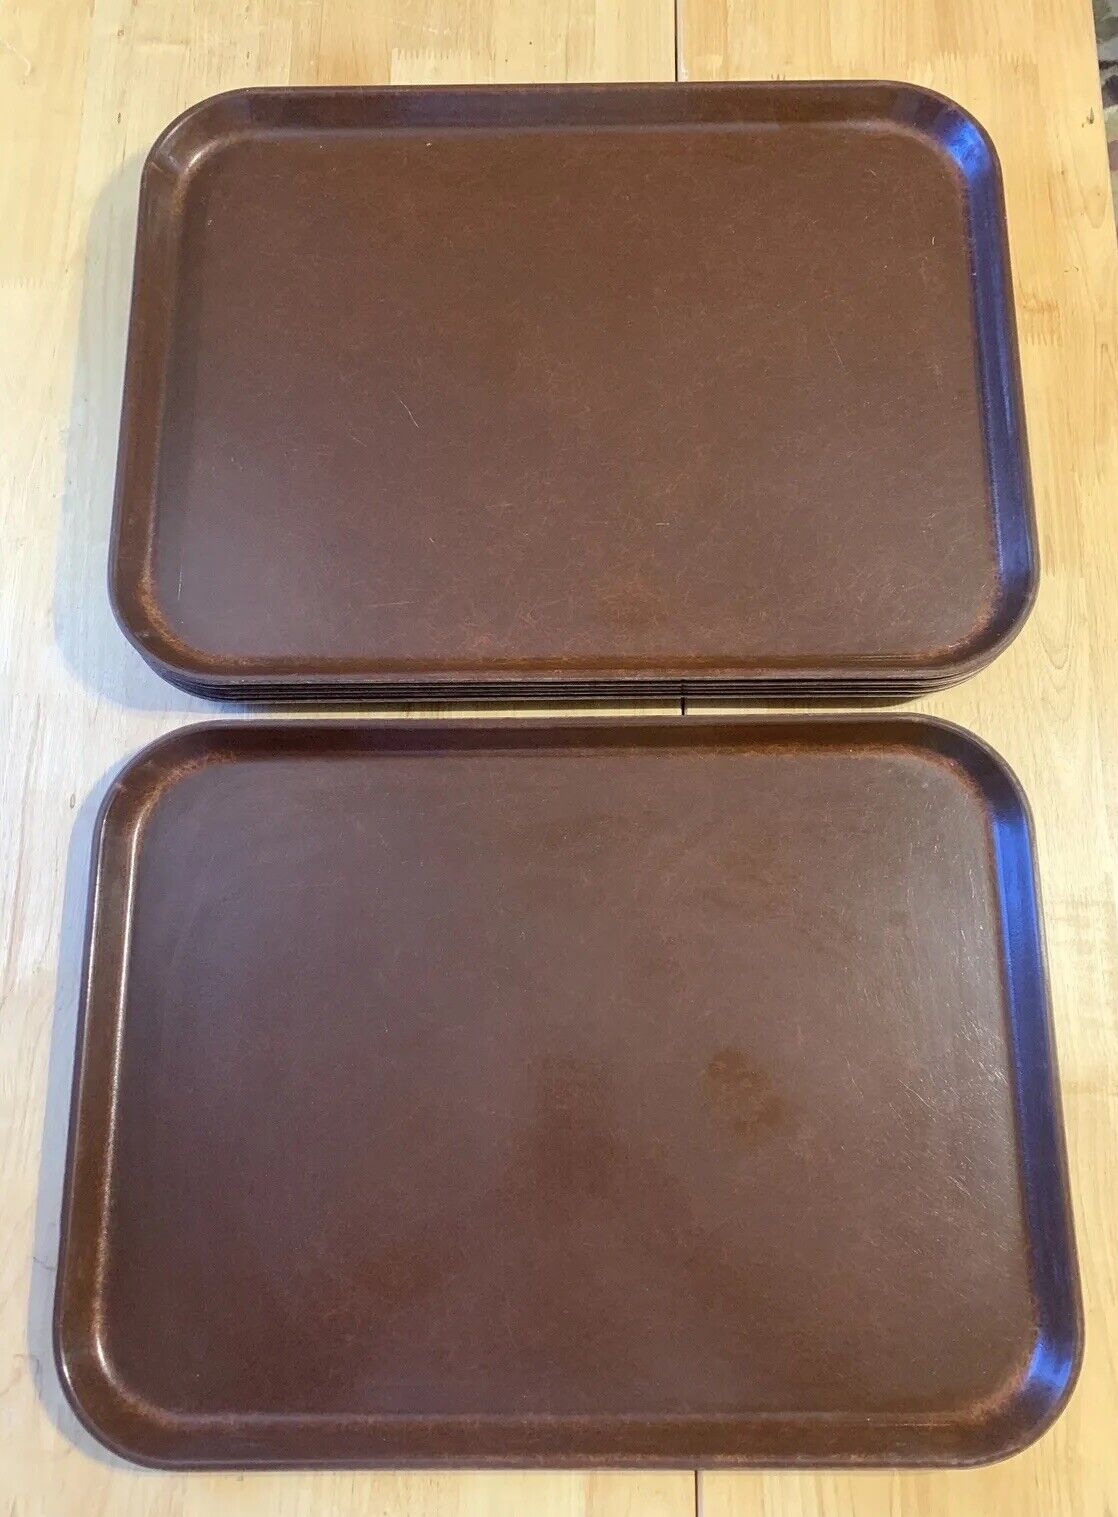 VNTGE SILITE FIBERGLASS BROWN LUNCH TRAYS (6)CAFETERIA DINING SERVING 20”x 15”